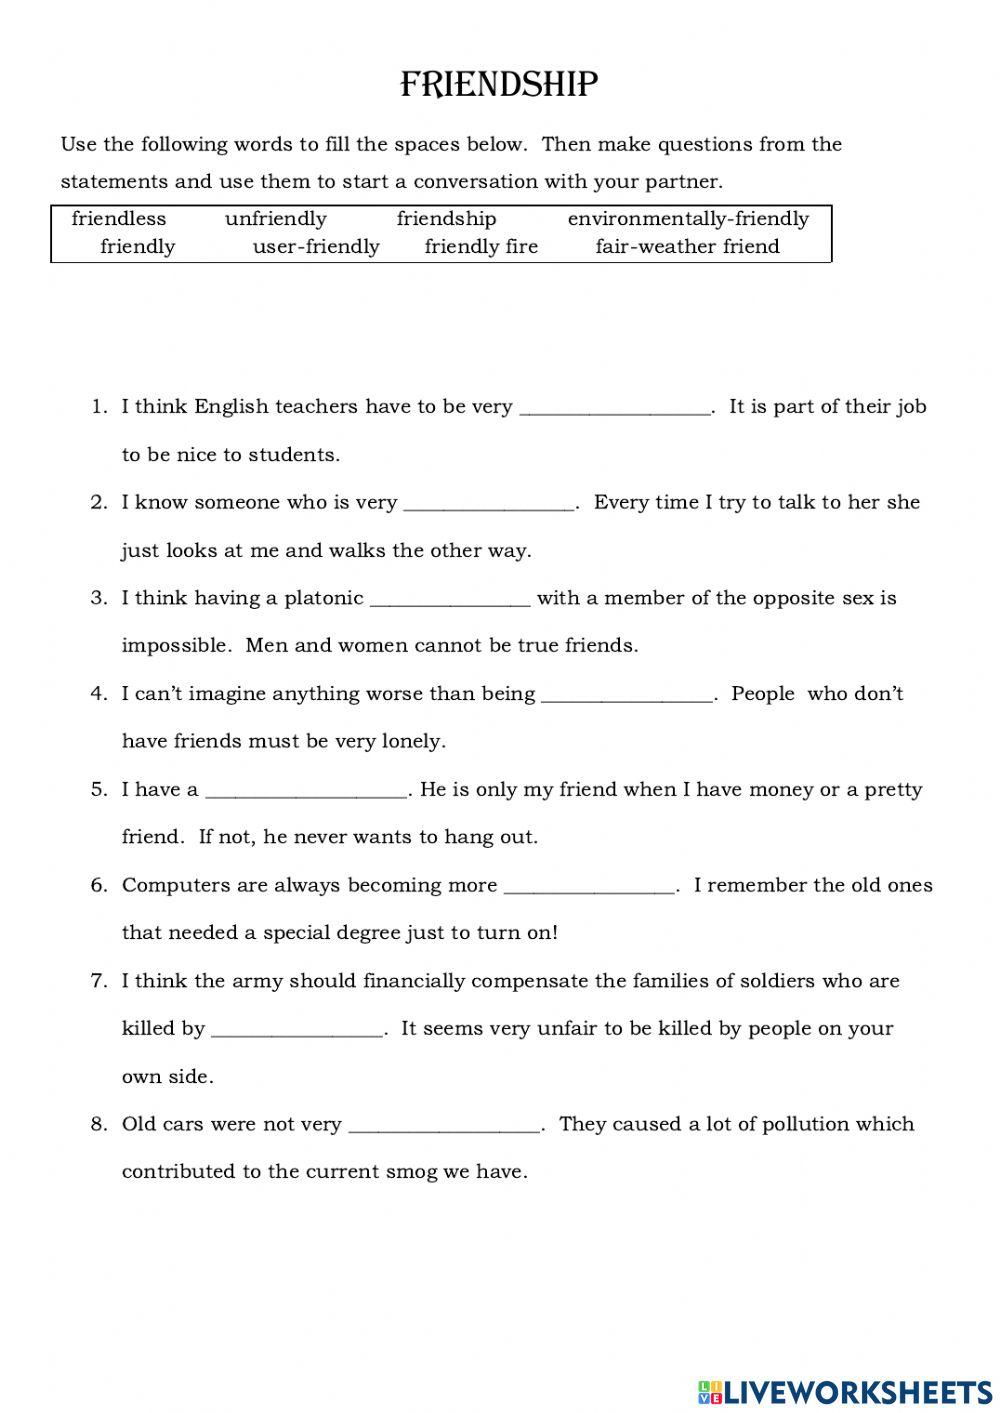 Friends forms